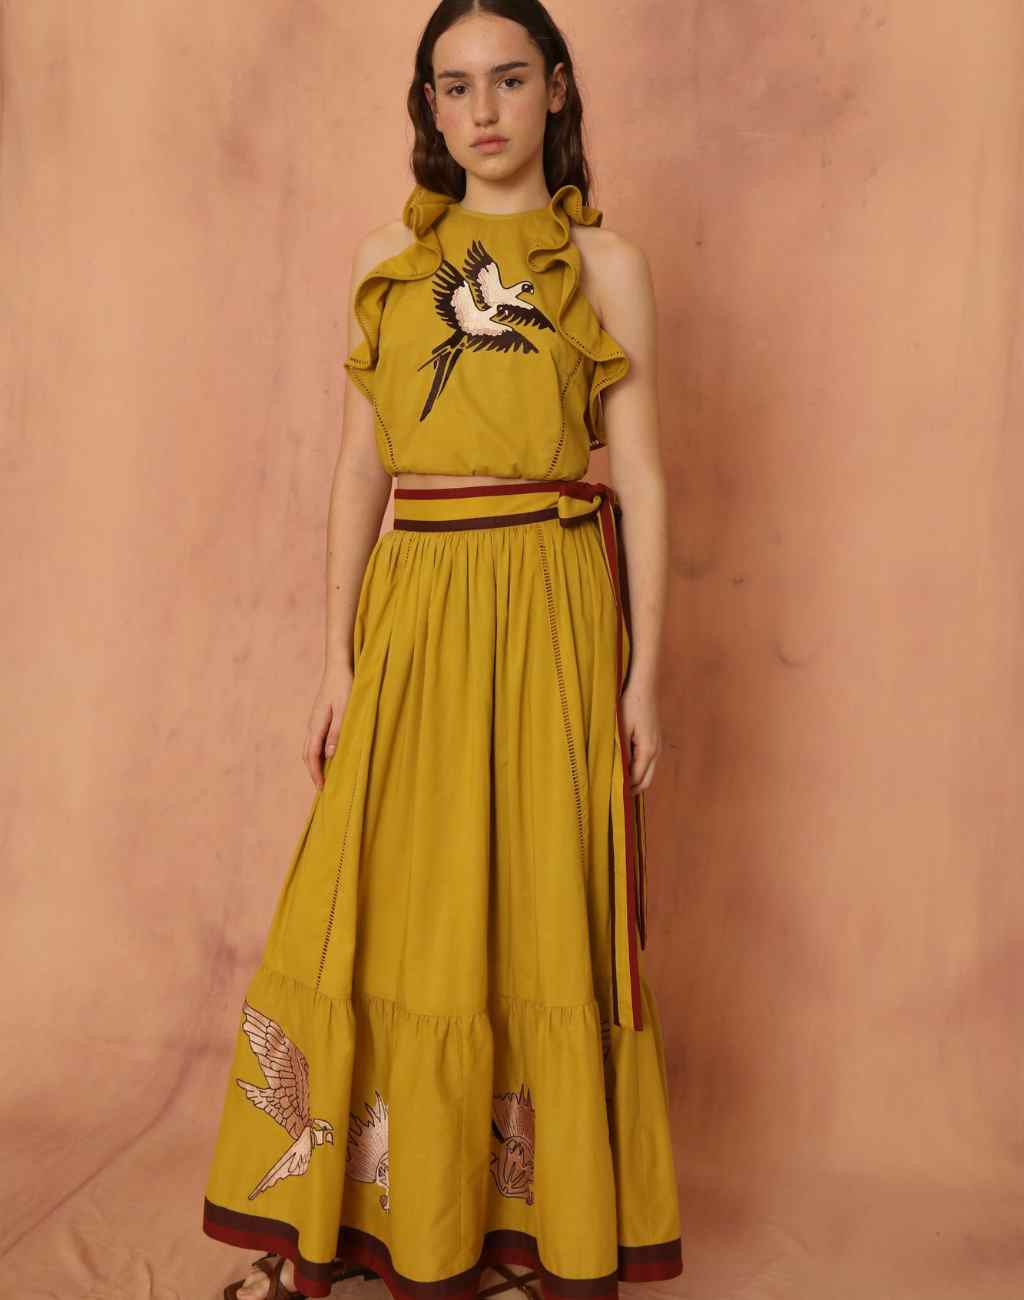 Malibu Maxi Skirt with Embroidery - Visit Nifty Vero Alfie 